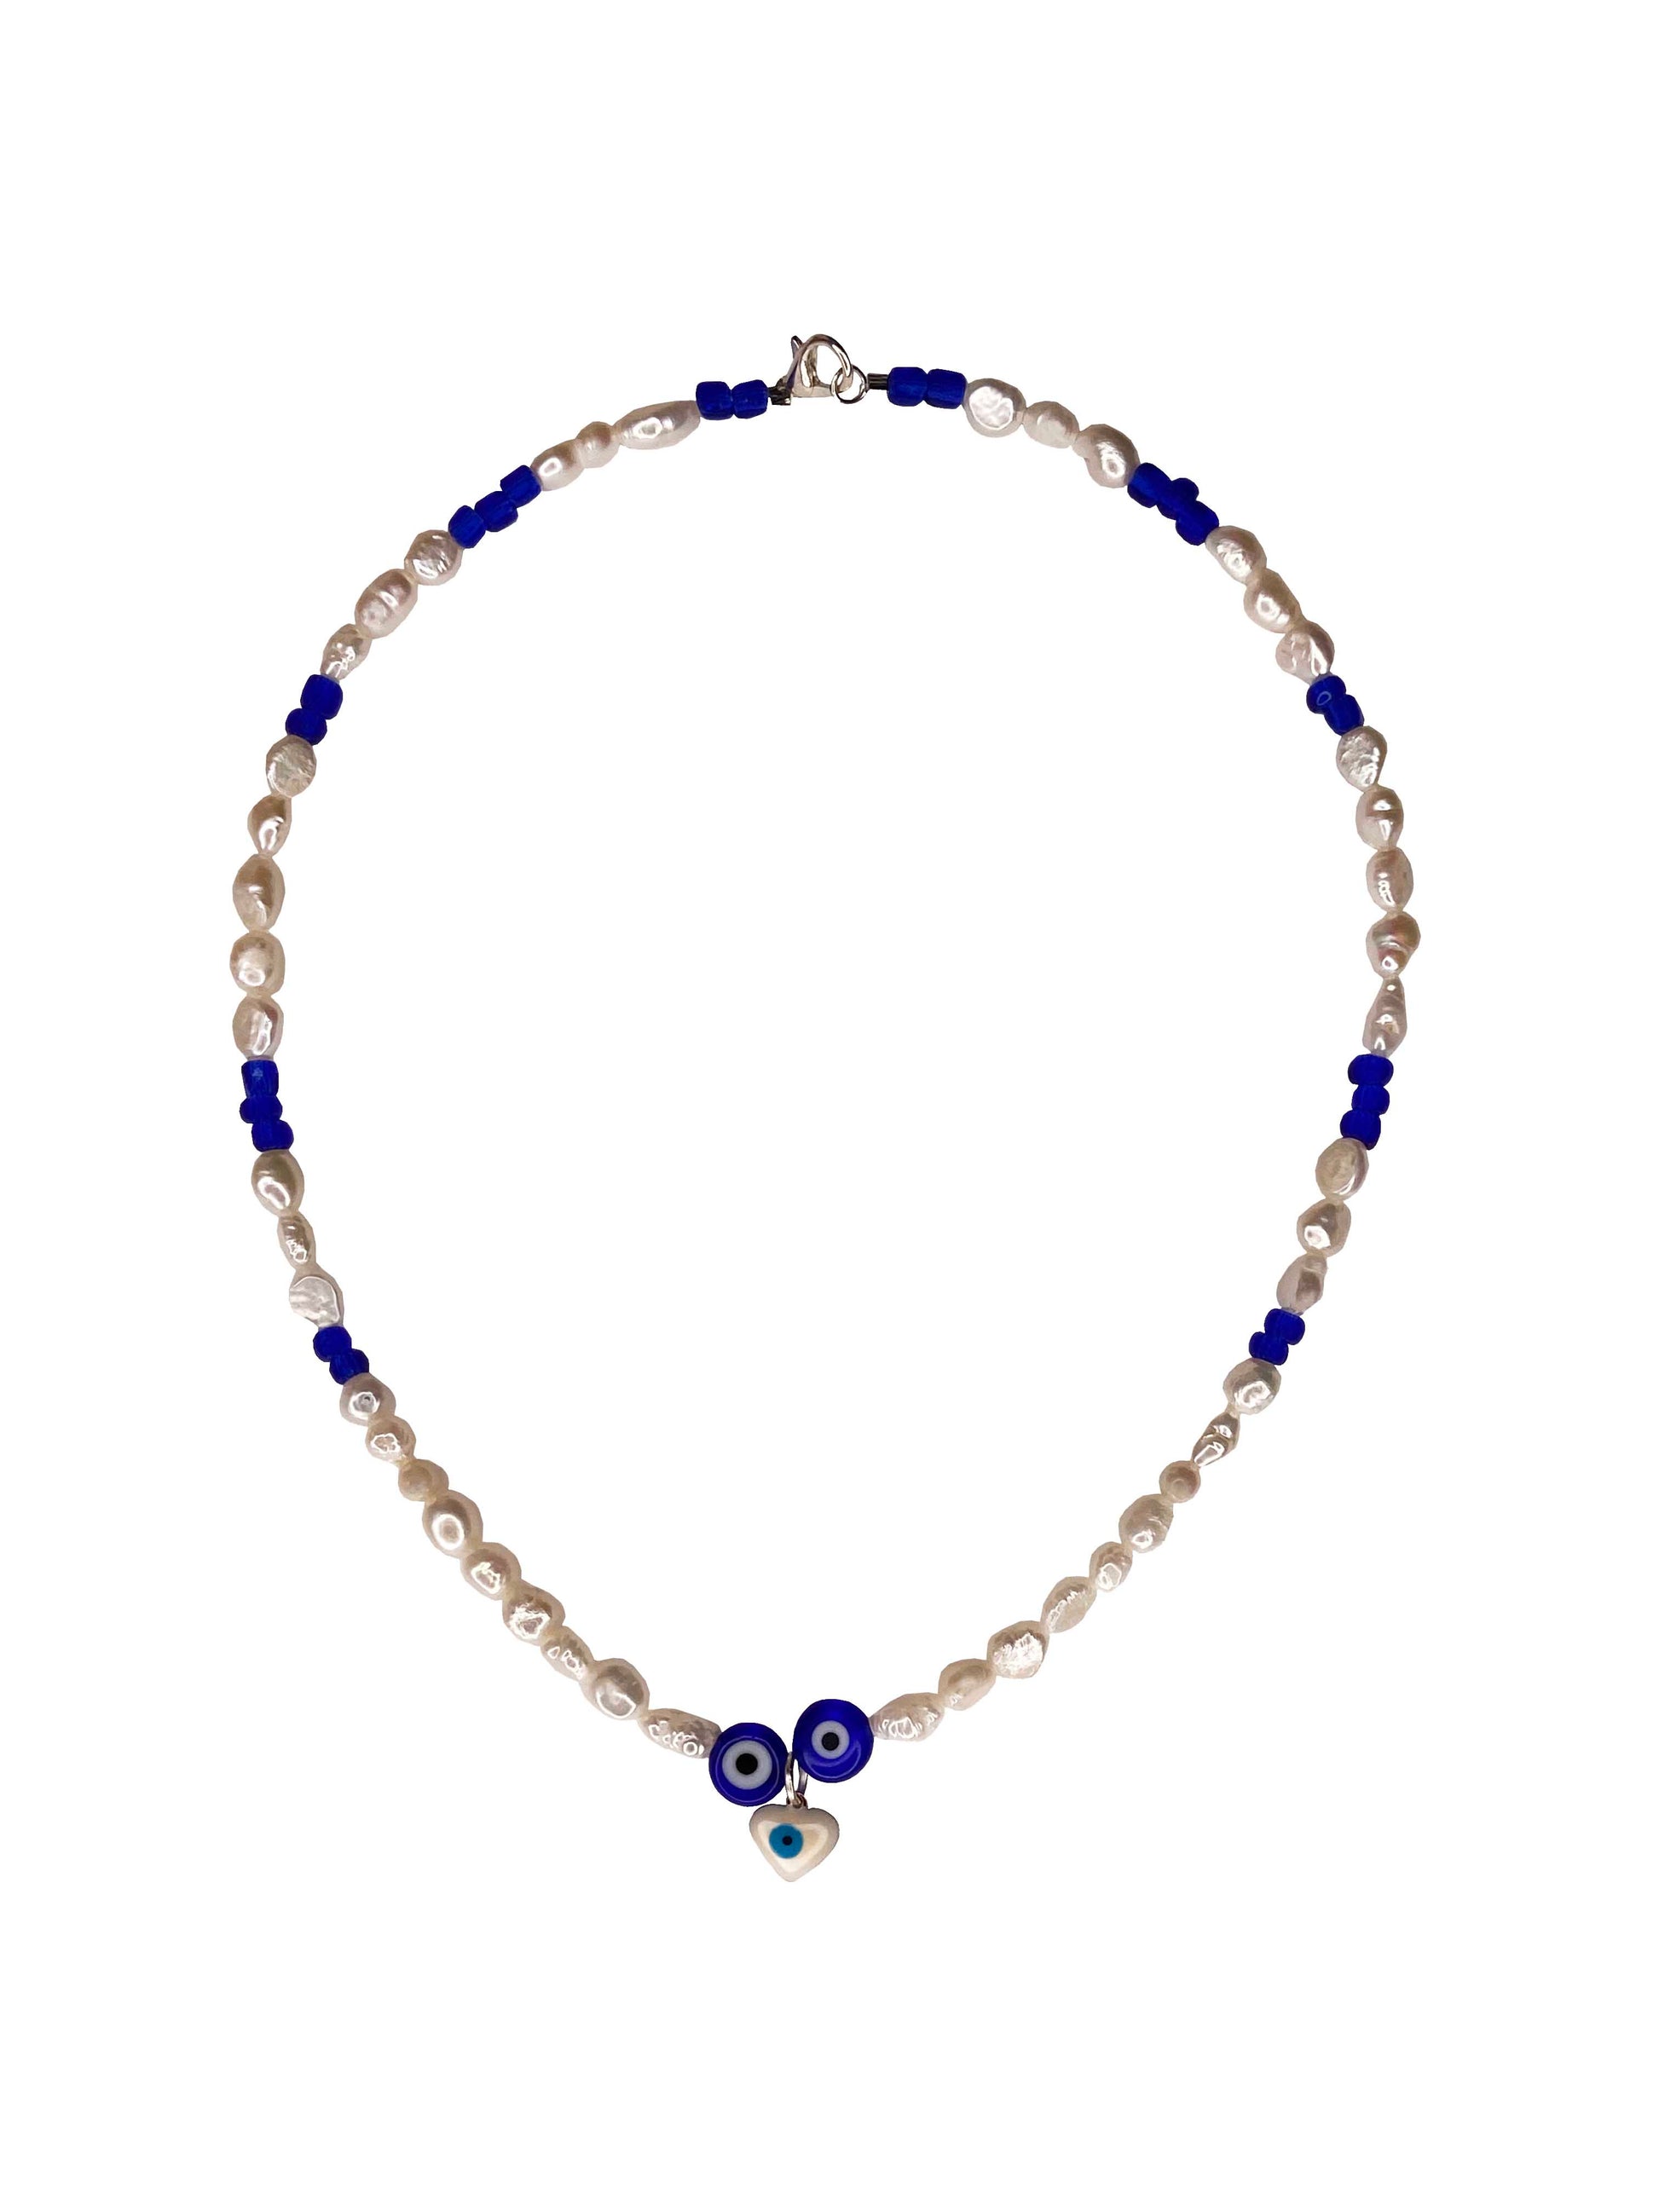 Handmade freshwater pearl & glass beaded necklace with a blue nazar amulet, and white evil eye charm.